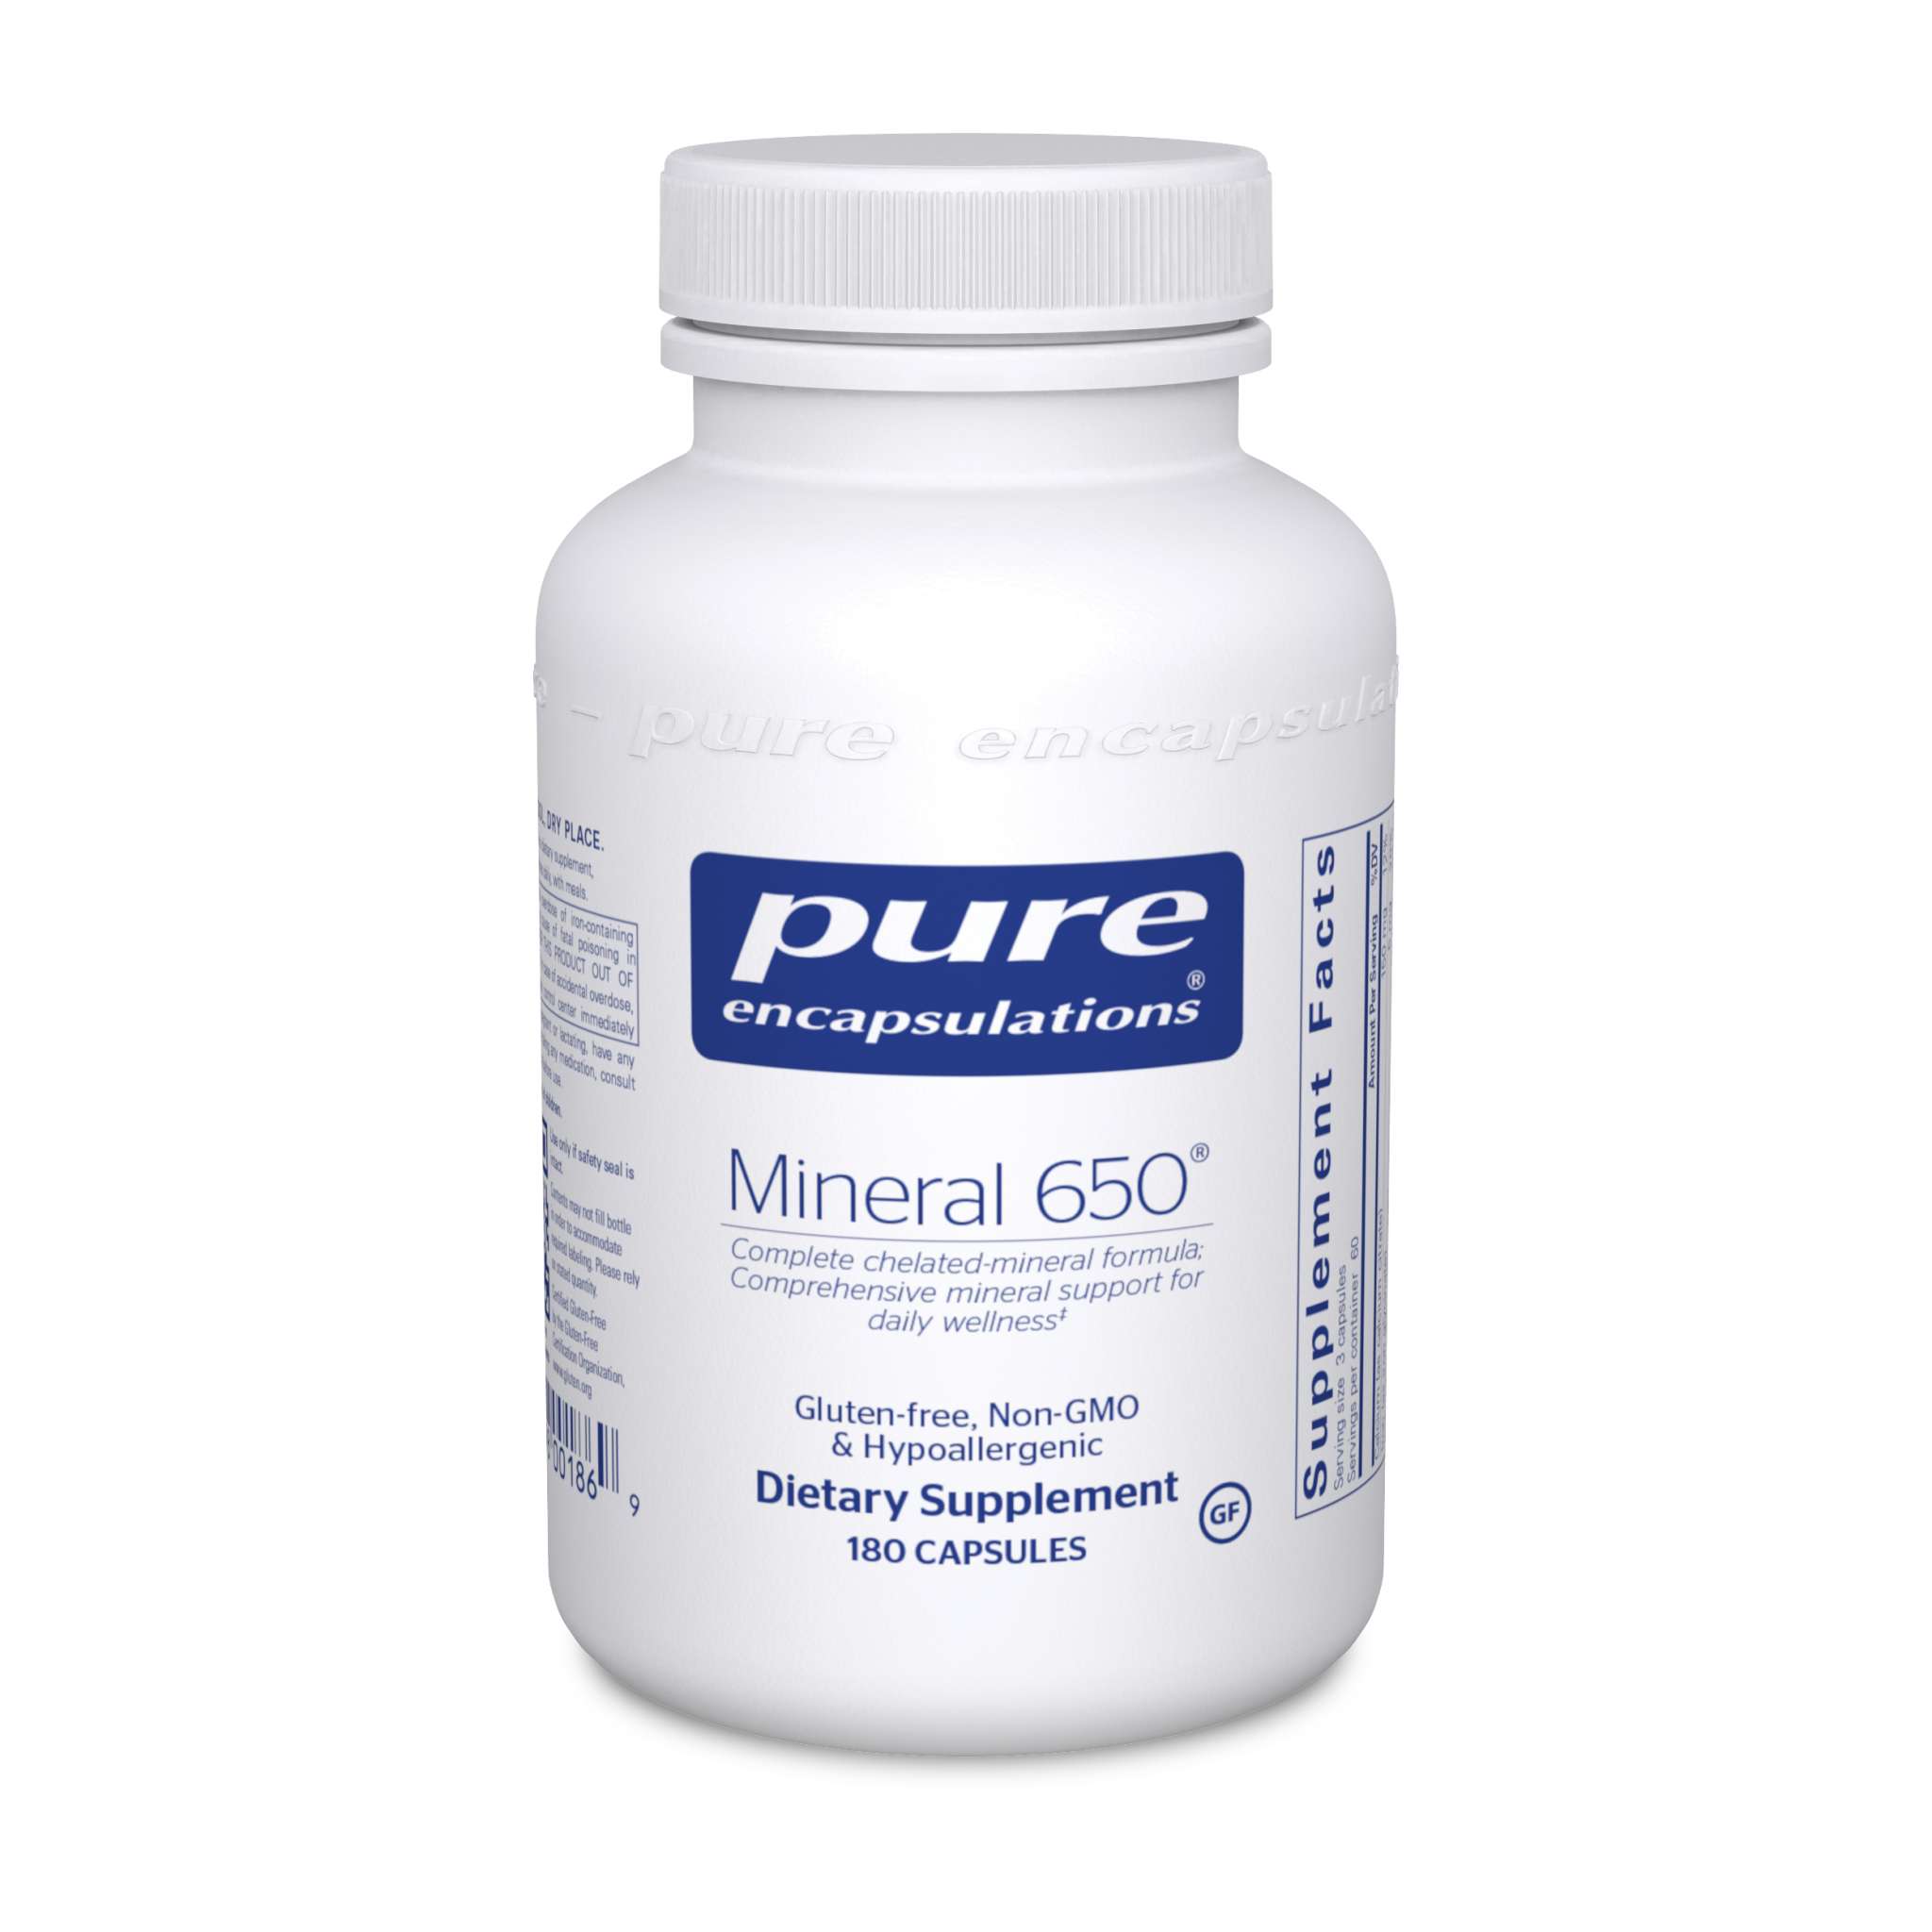 Pure Encapsulations - Mineral 650